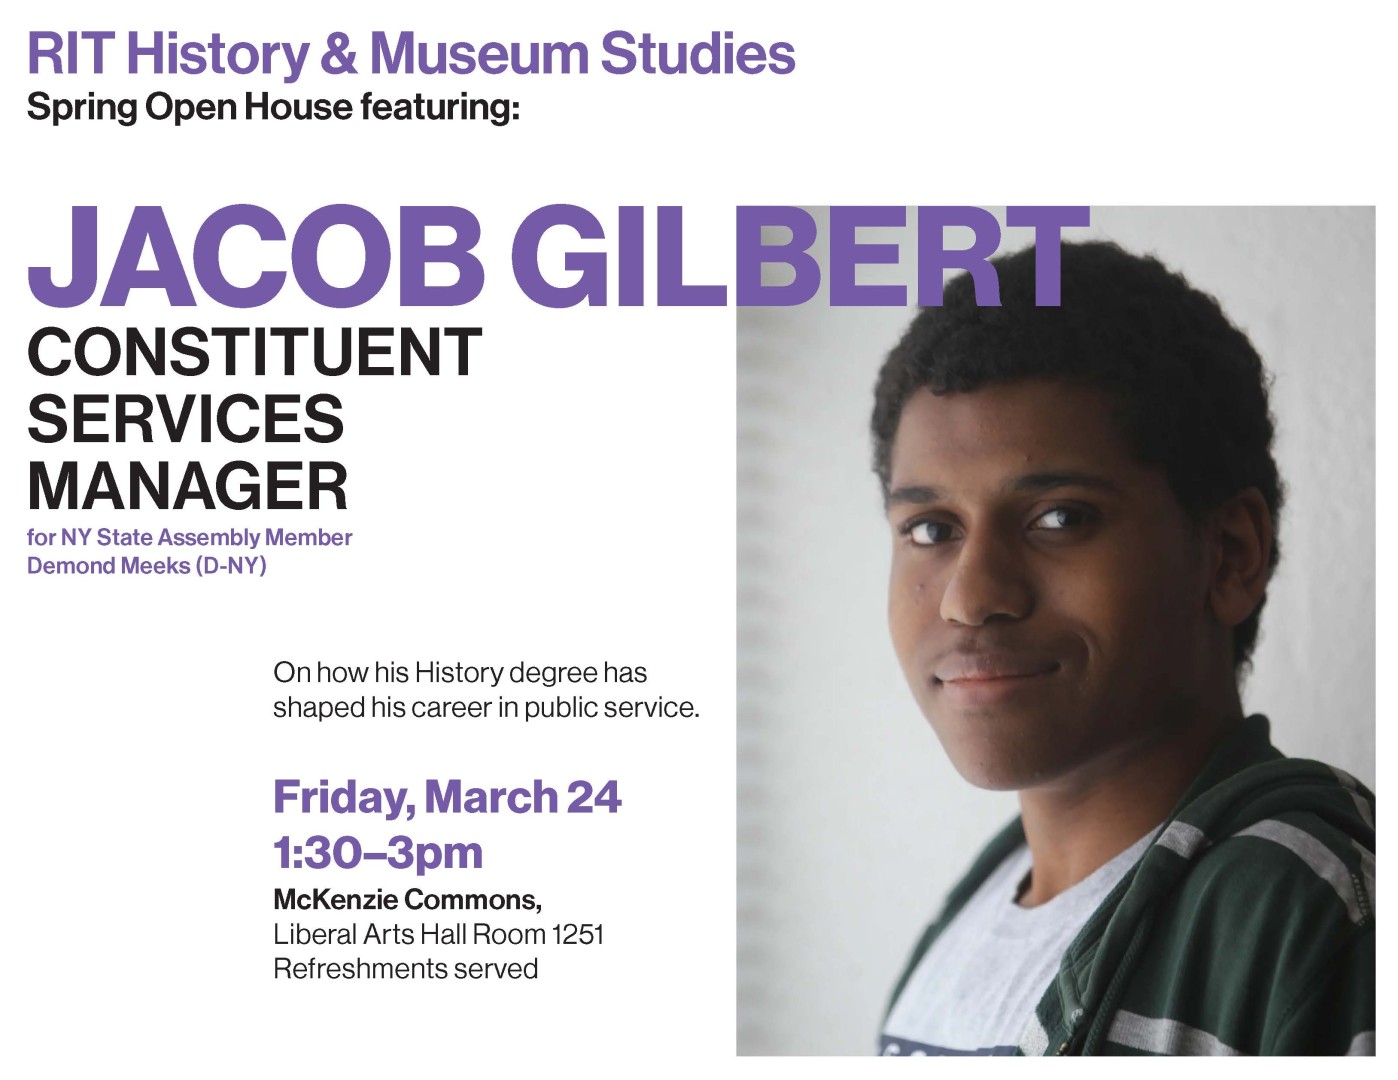 an image of Jacob gilbert who will speak at this event about his career